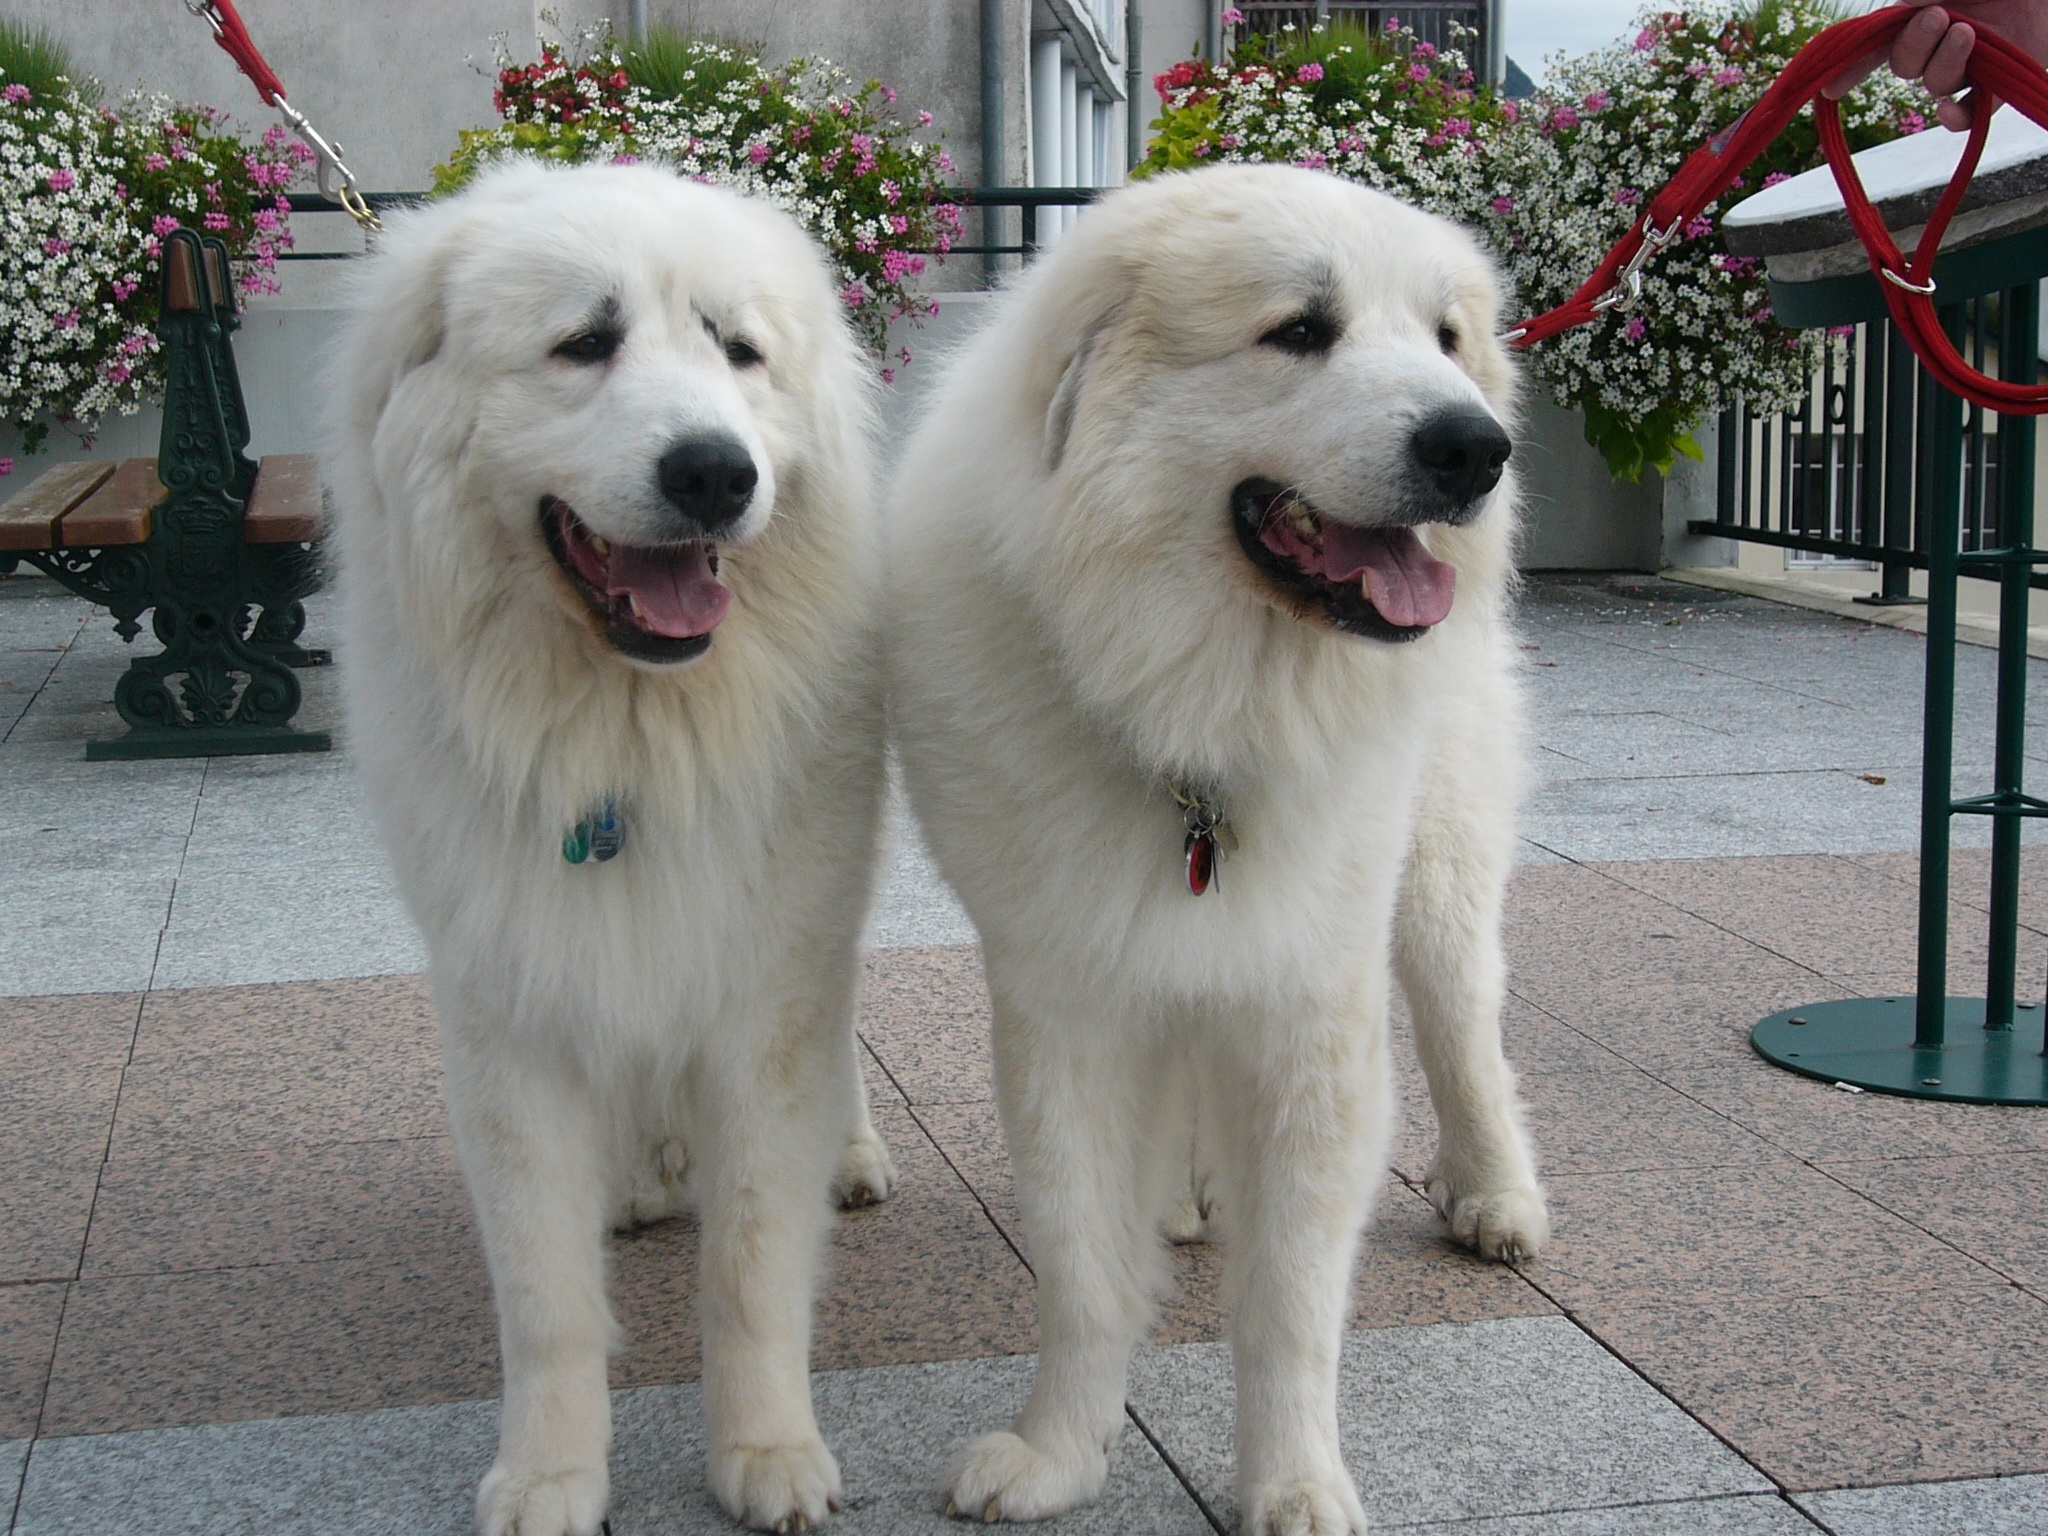 Two Great Pyrenees dogs wallpapers and images 